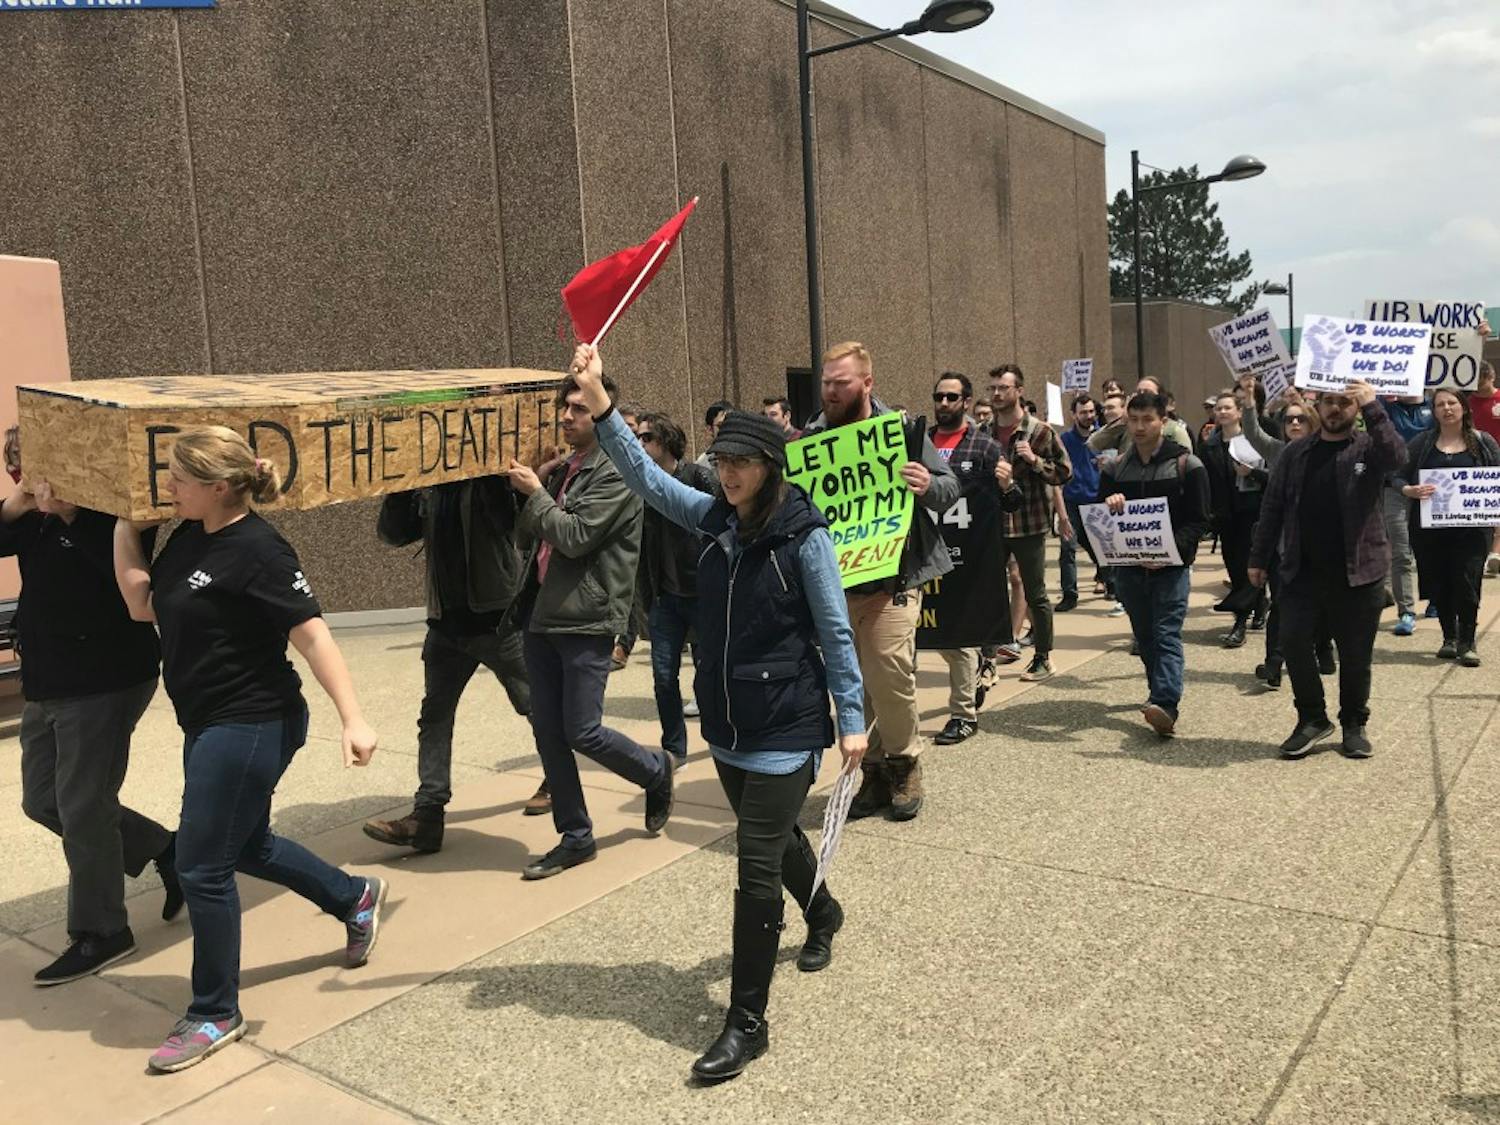 &nbsp;Protesters march from Clemens Hall to Capen Hall carrying a coffin made of plywood.&nbsp;